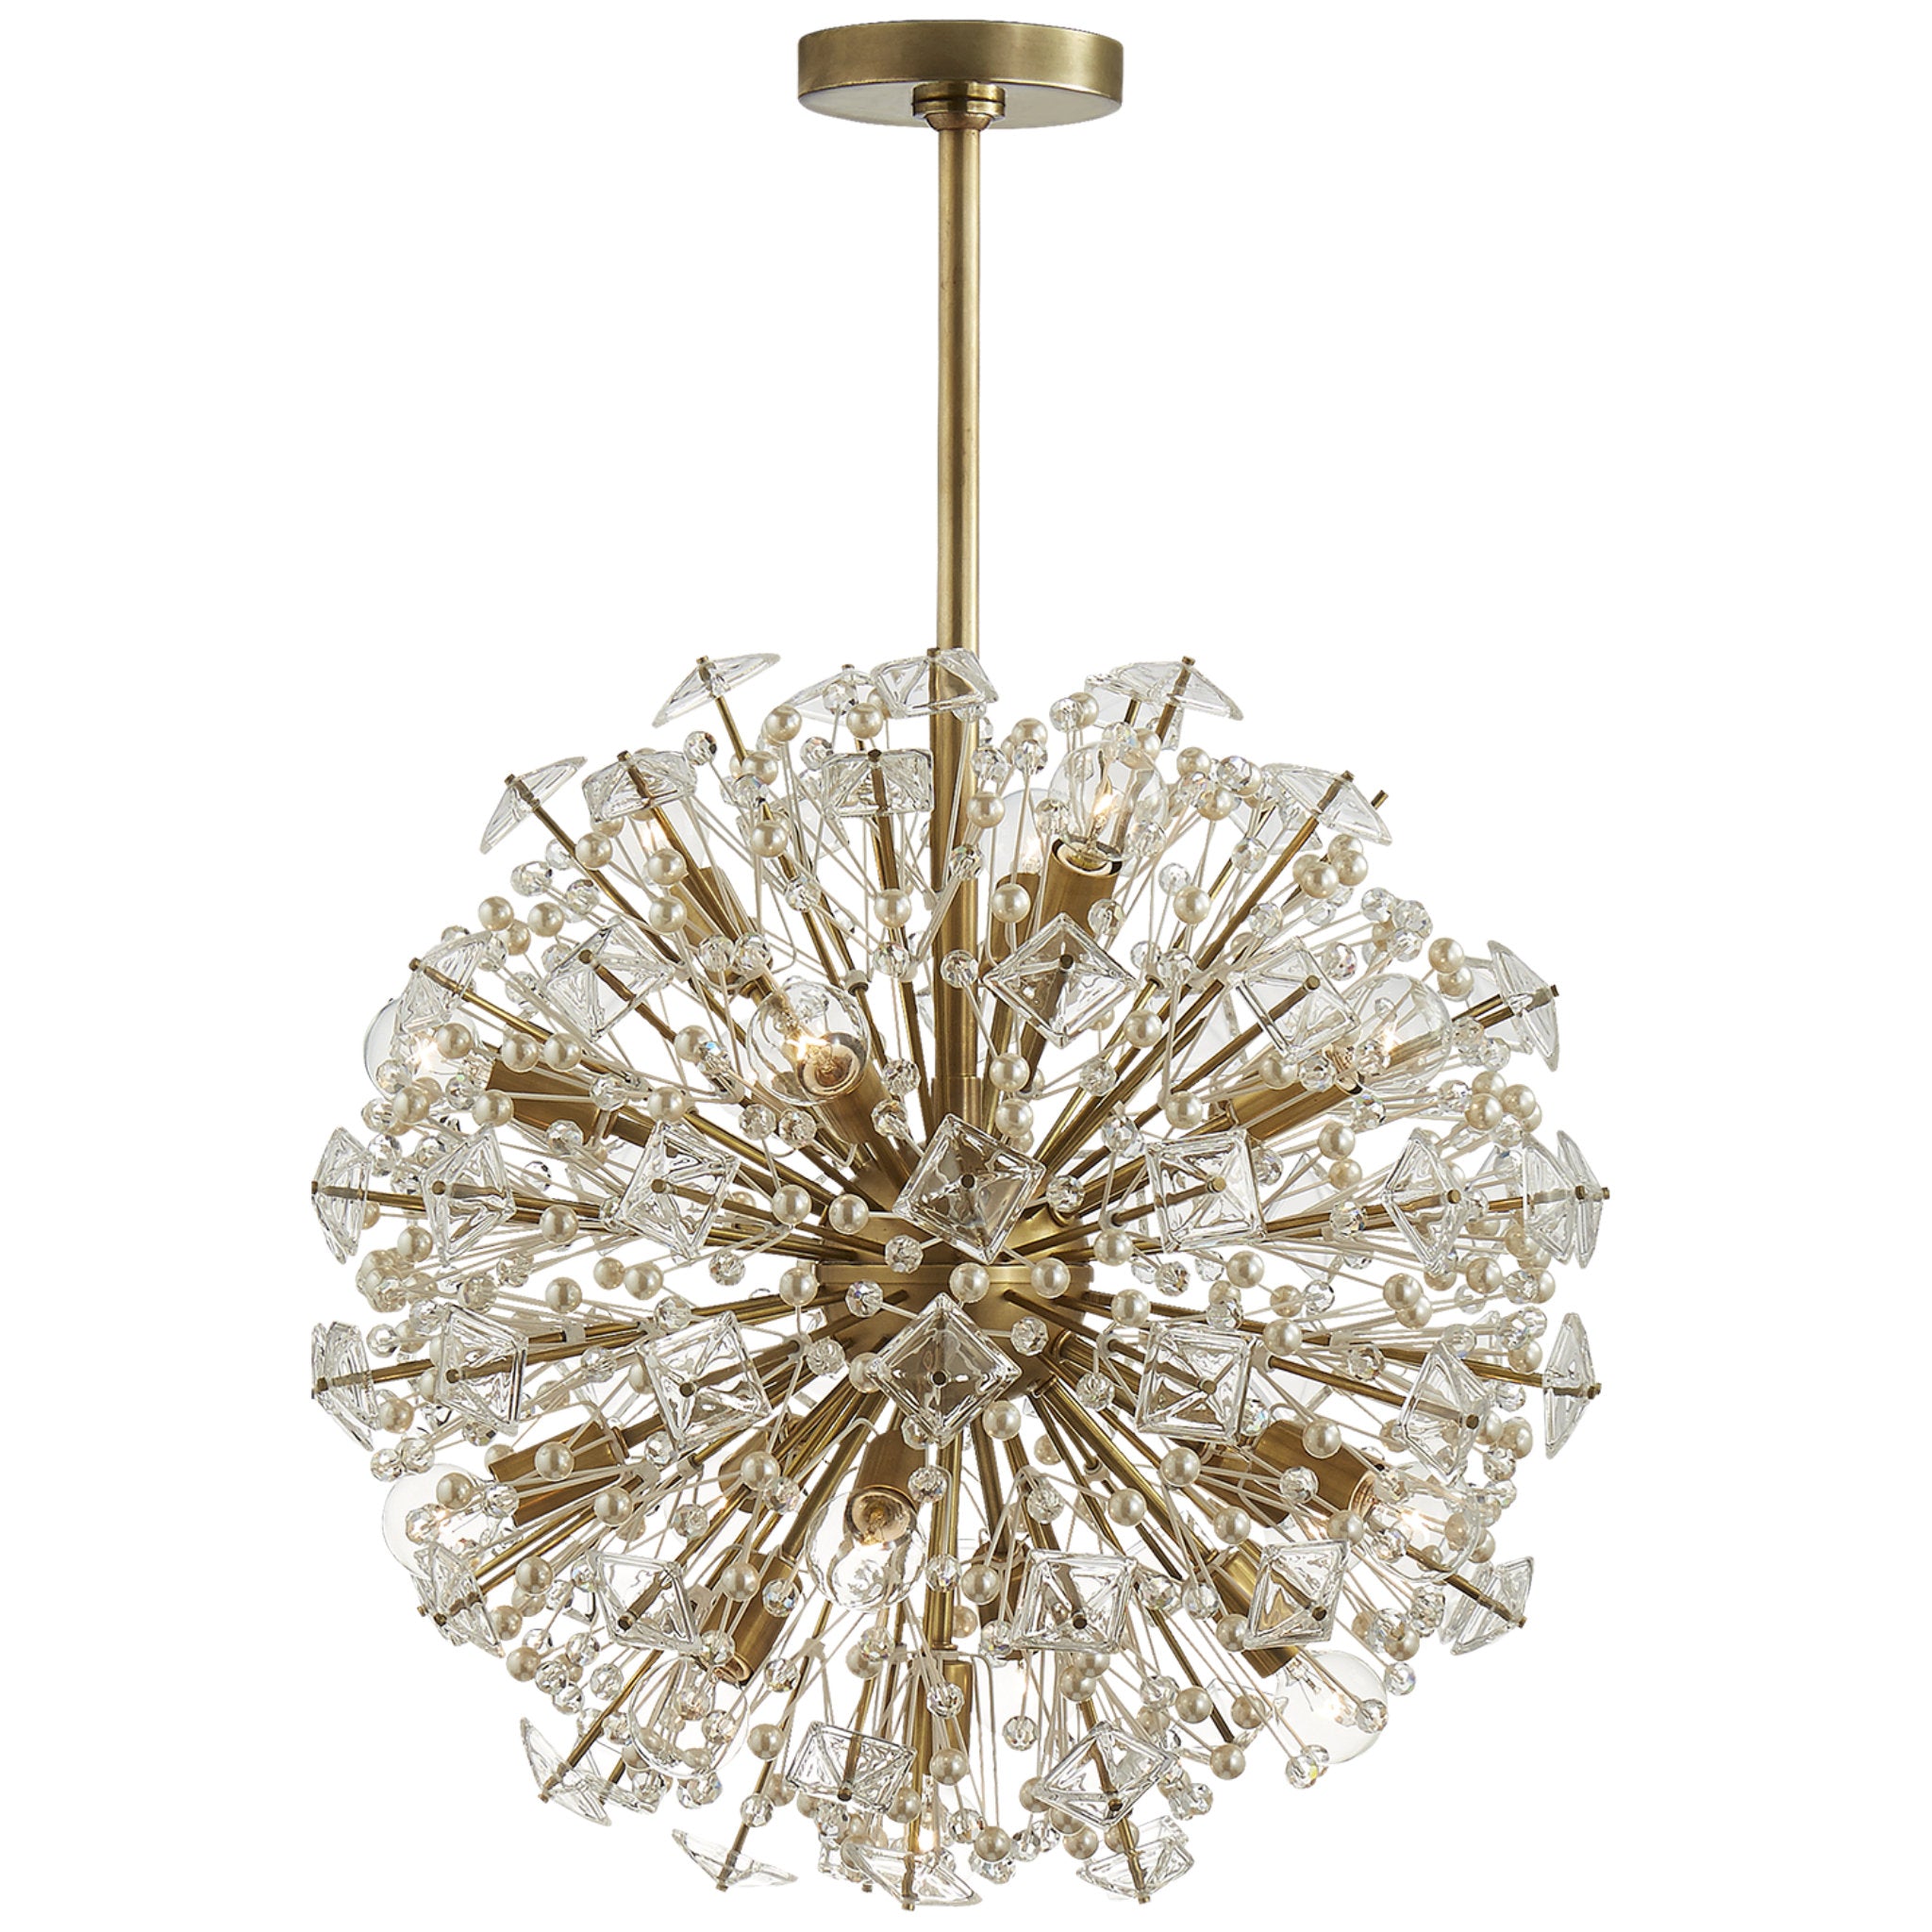 kate spade new york Dickinson Medium Chandelier in Soft Brass with Clear Glass and Cream Pearls